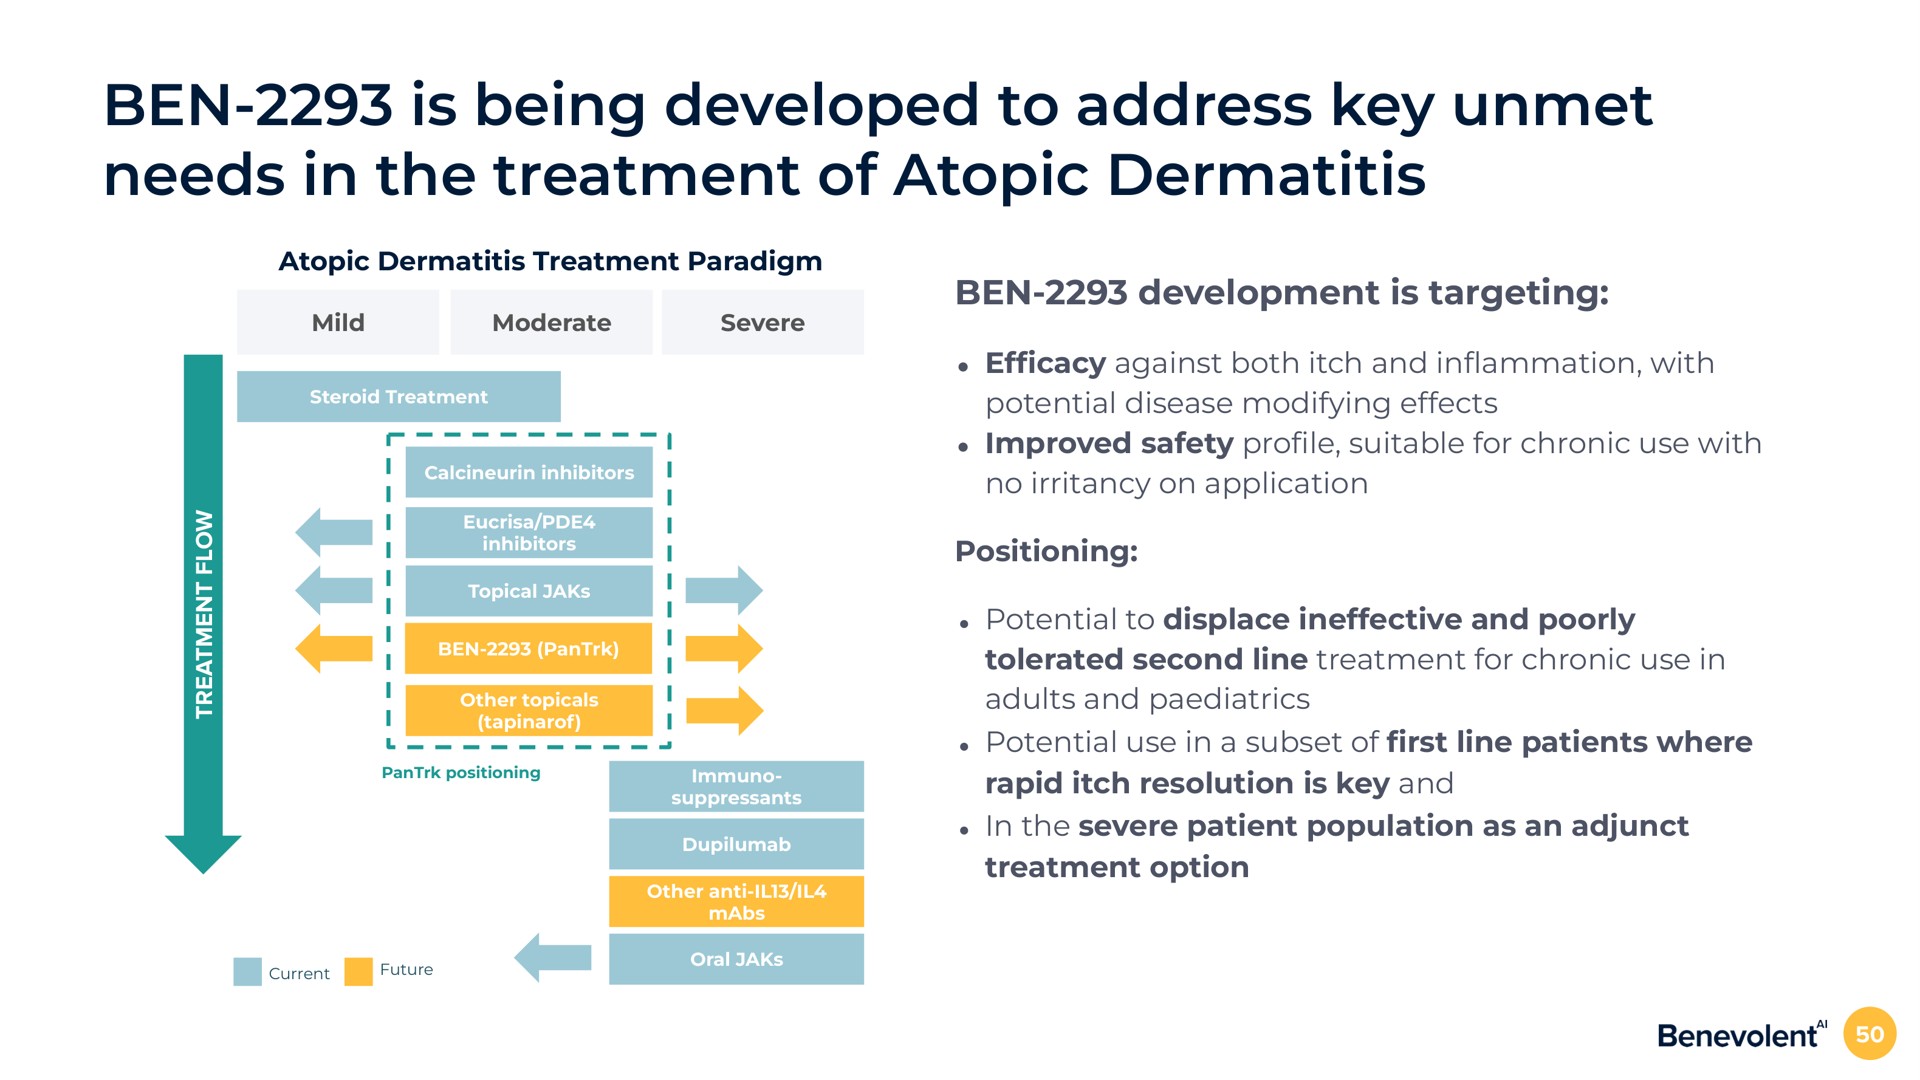 ben is being developed to address key unmet needs in the treatment of atopic dermatitis atopic dermatitis treatment paradigm ben development is targeting against both itch and in with potential disease modifying effects improved safety pro suitable for chronic use with no irritancy on application positioning potential to displace ineffective and poorly tolerated second line treatment for chronic use in adults and potential use in a subset of line patients where rapid itch resolution is key and in the severe patient population as an adjunct treatment option | BenevolentAI